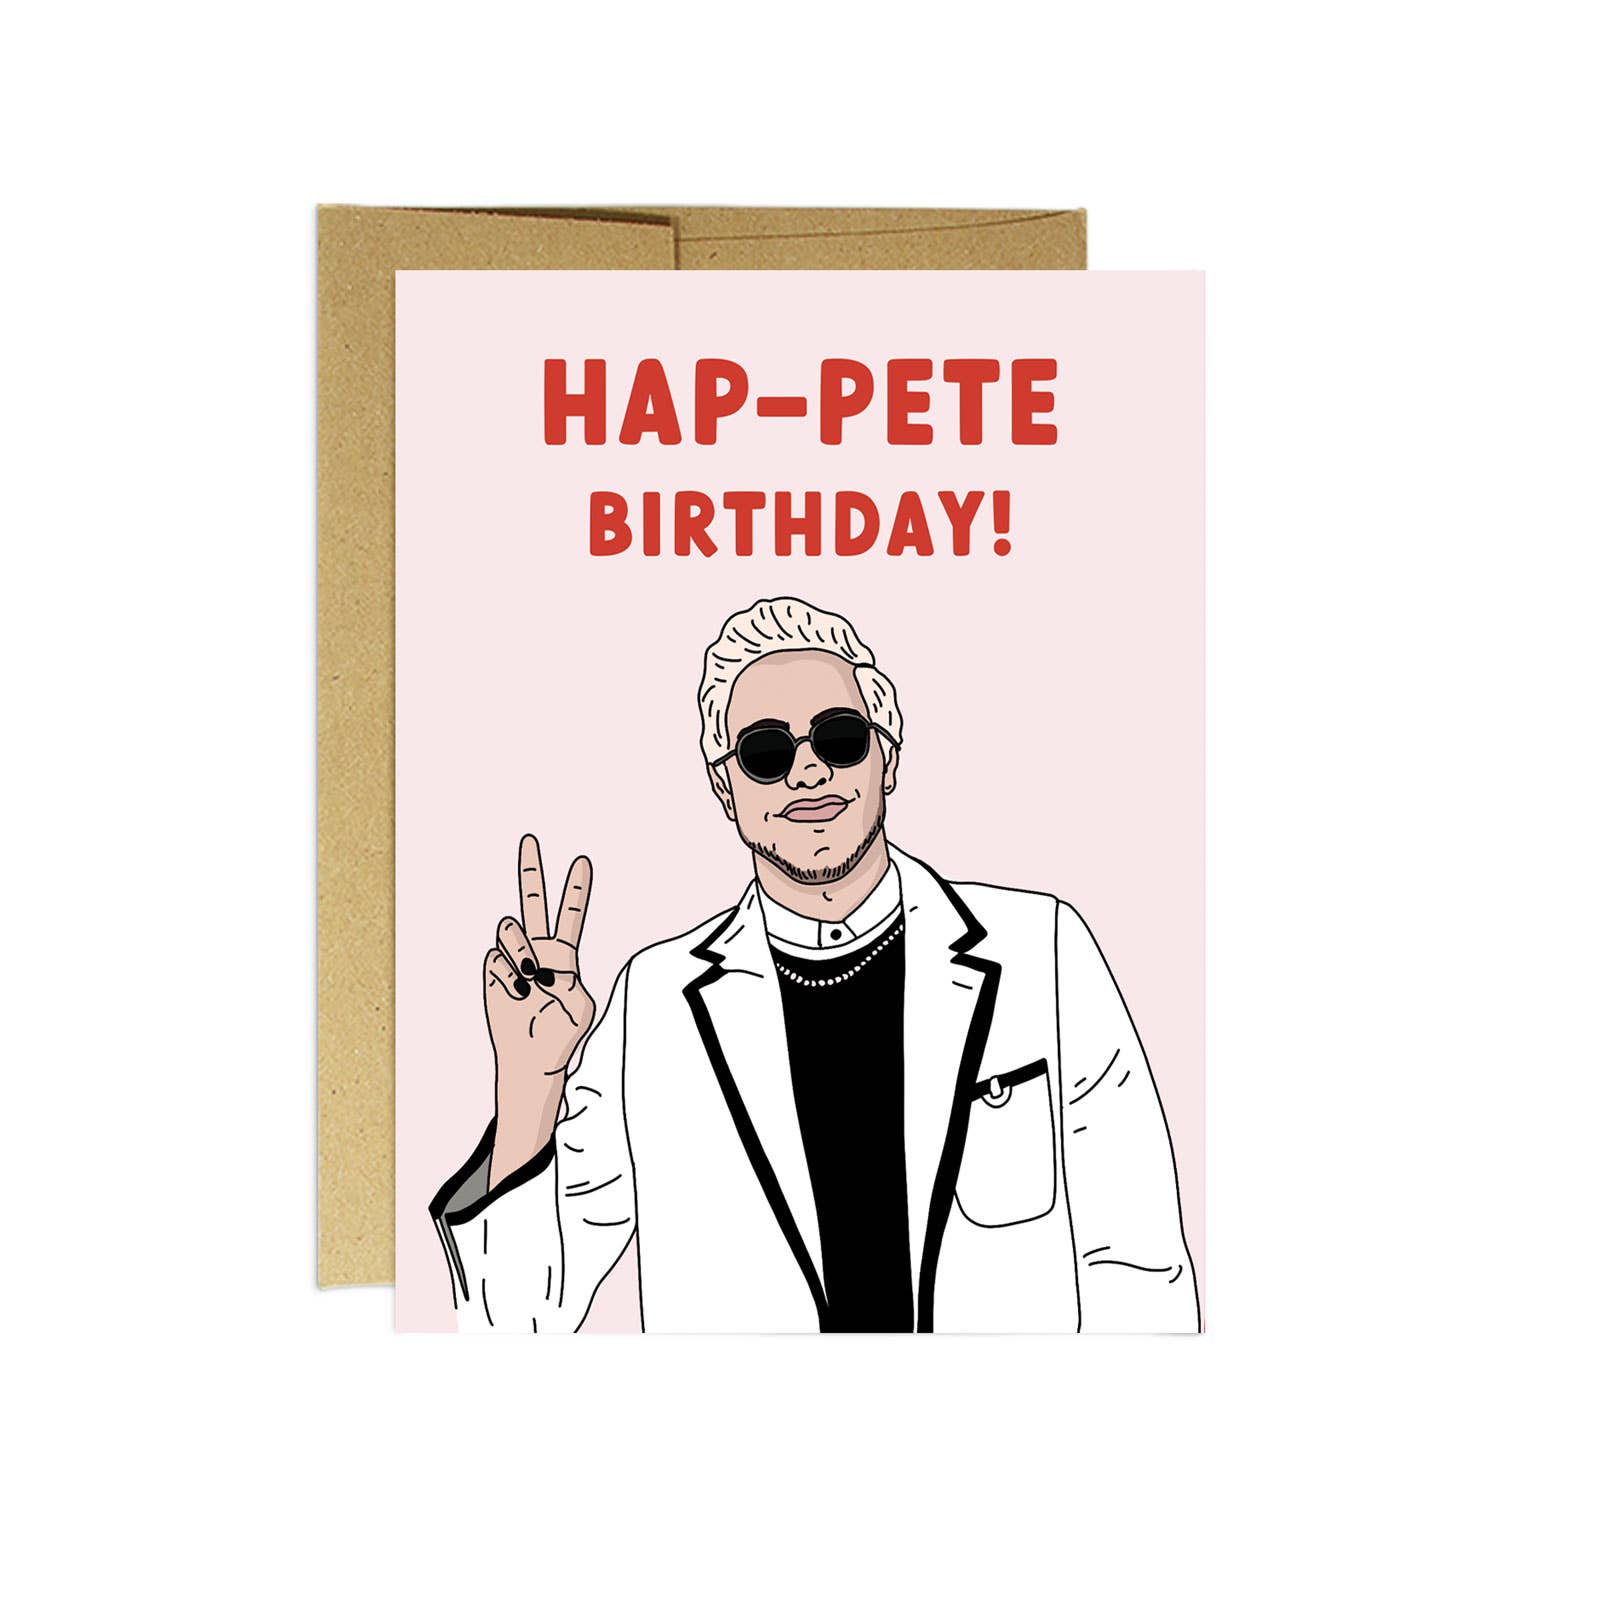 Party Mountain Greeting Card - Hap-Pete Birthday